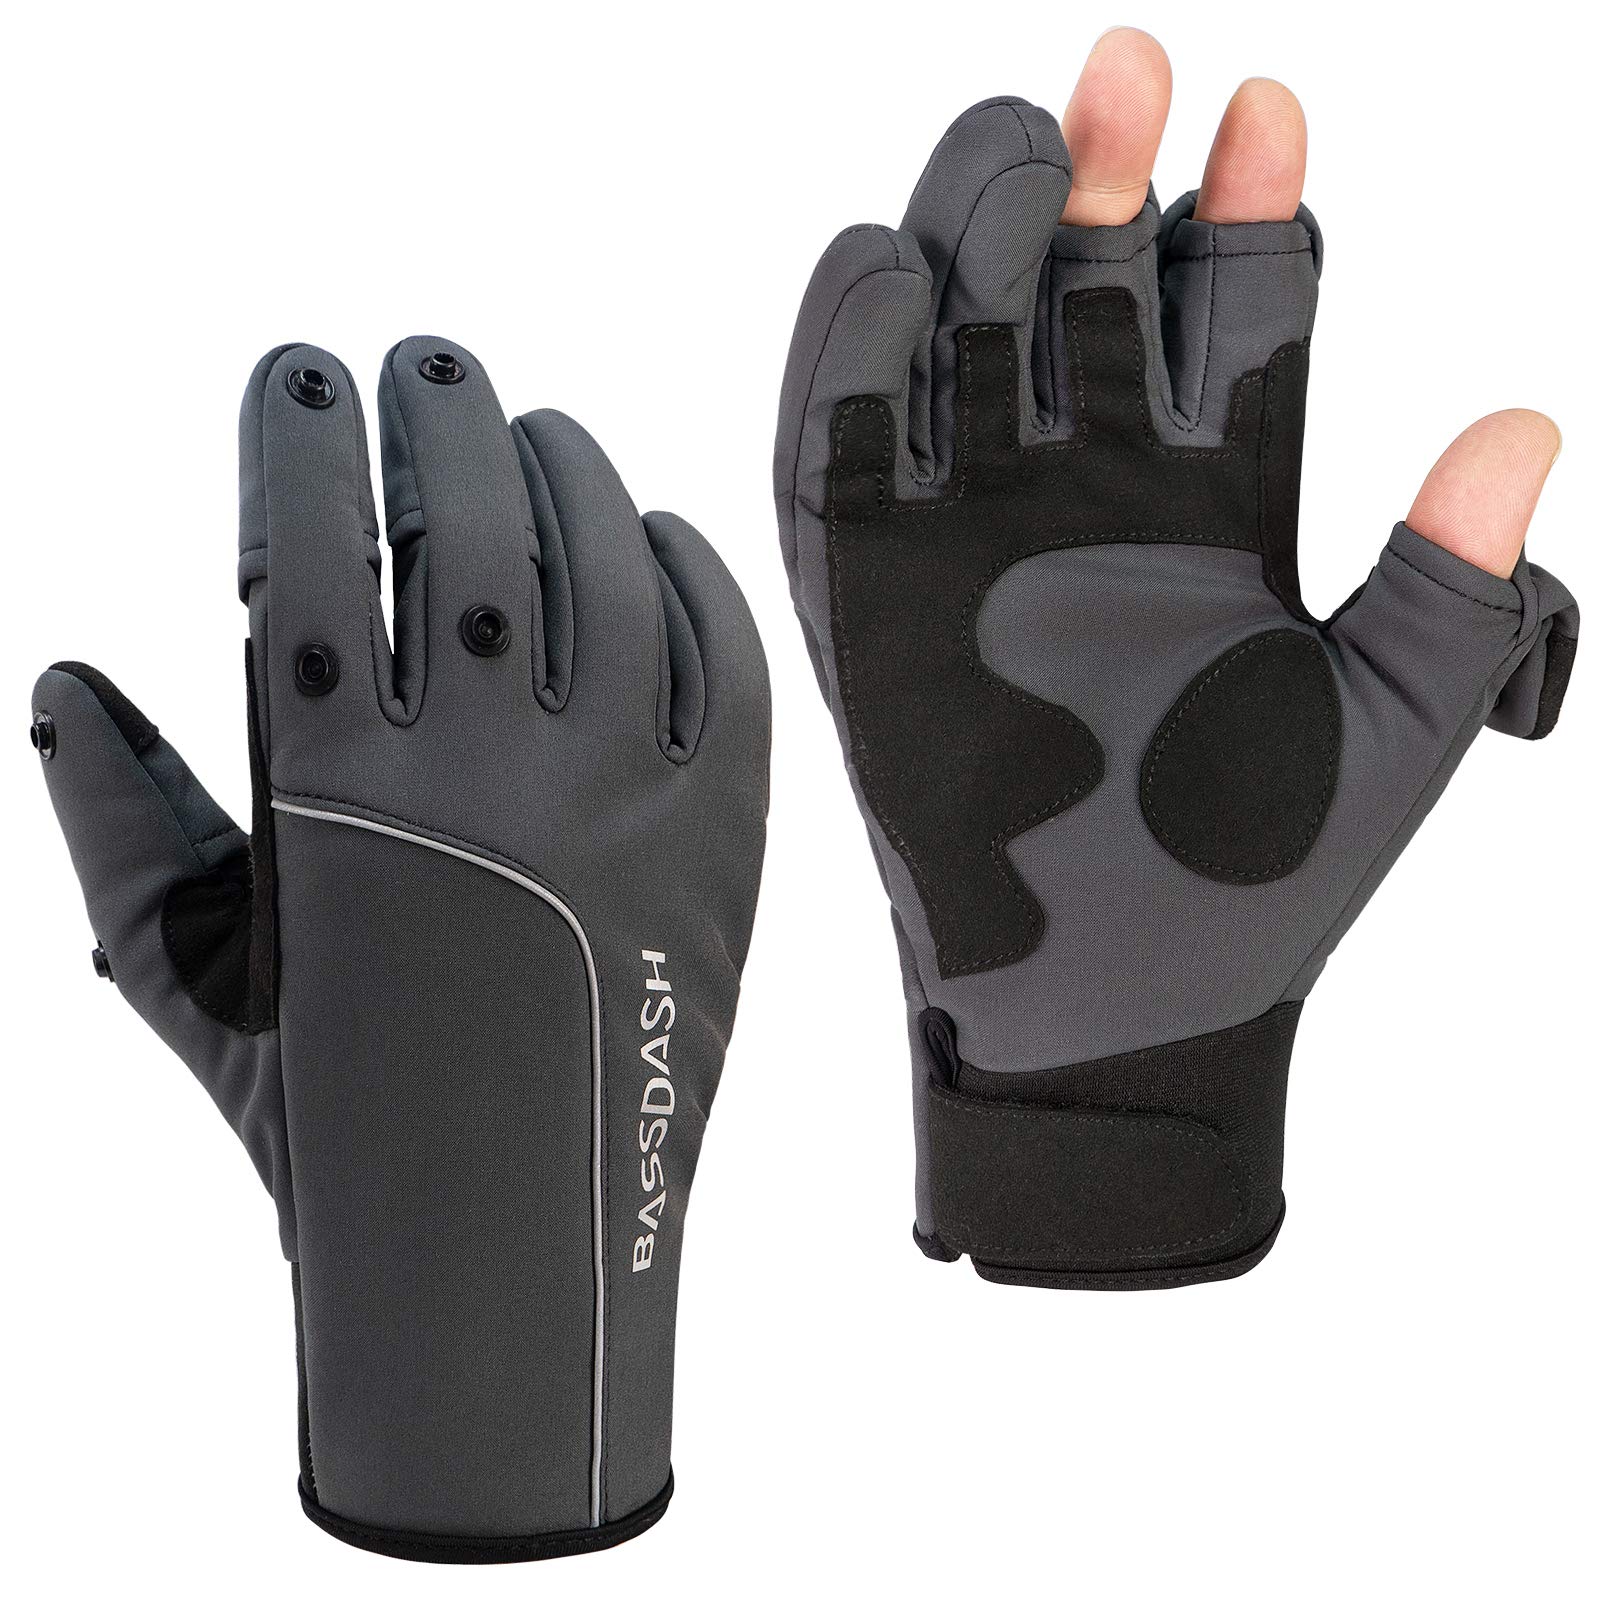 BASSDASH WintePro Insulated Fishing Gloves Water Repellent with